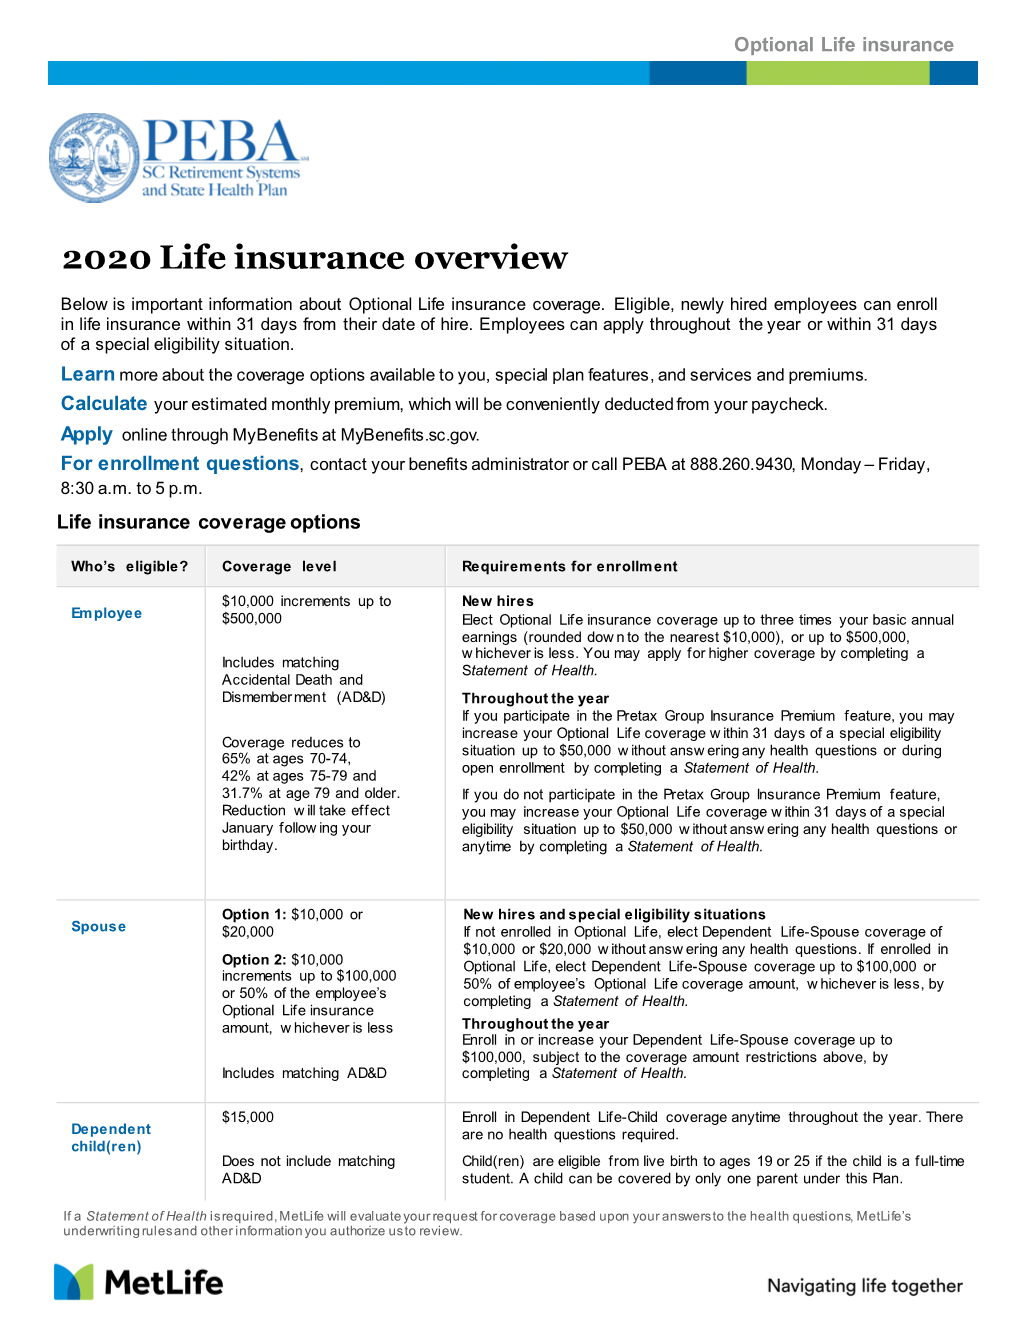 2020 Life Insurance Overview